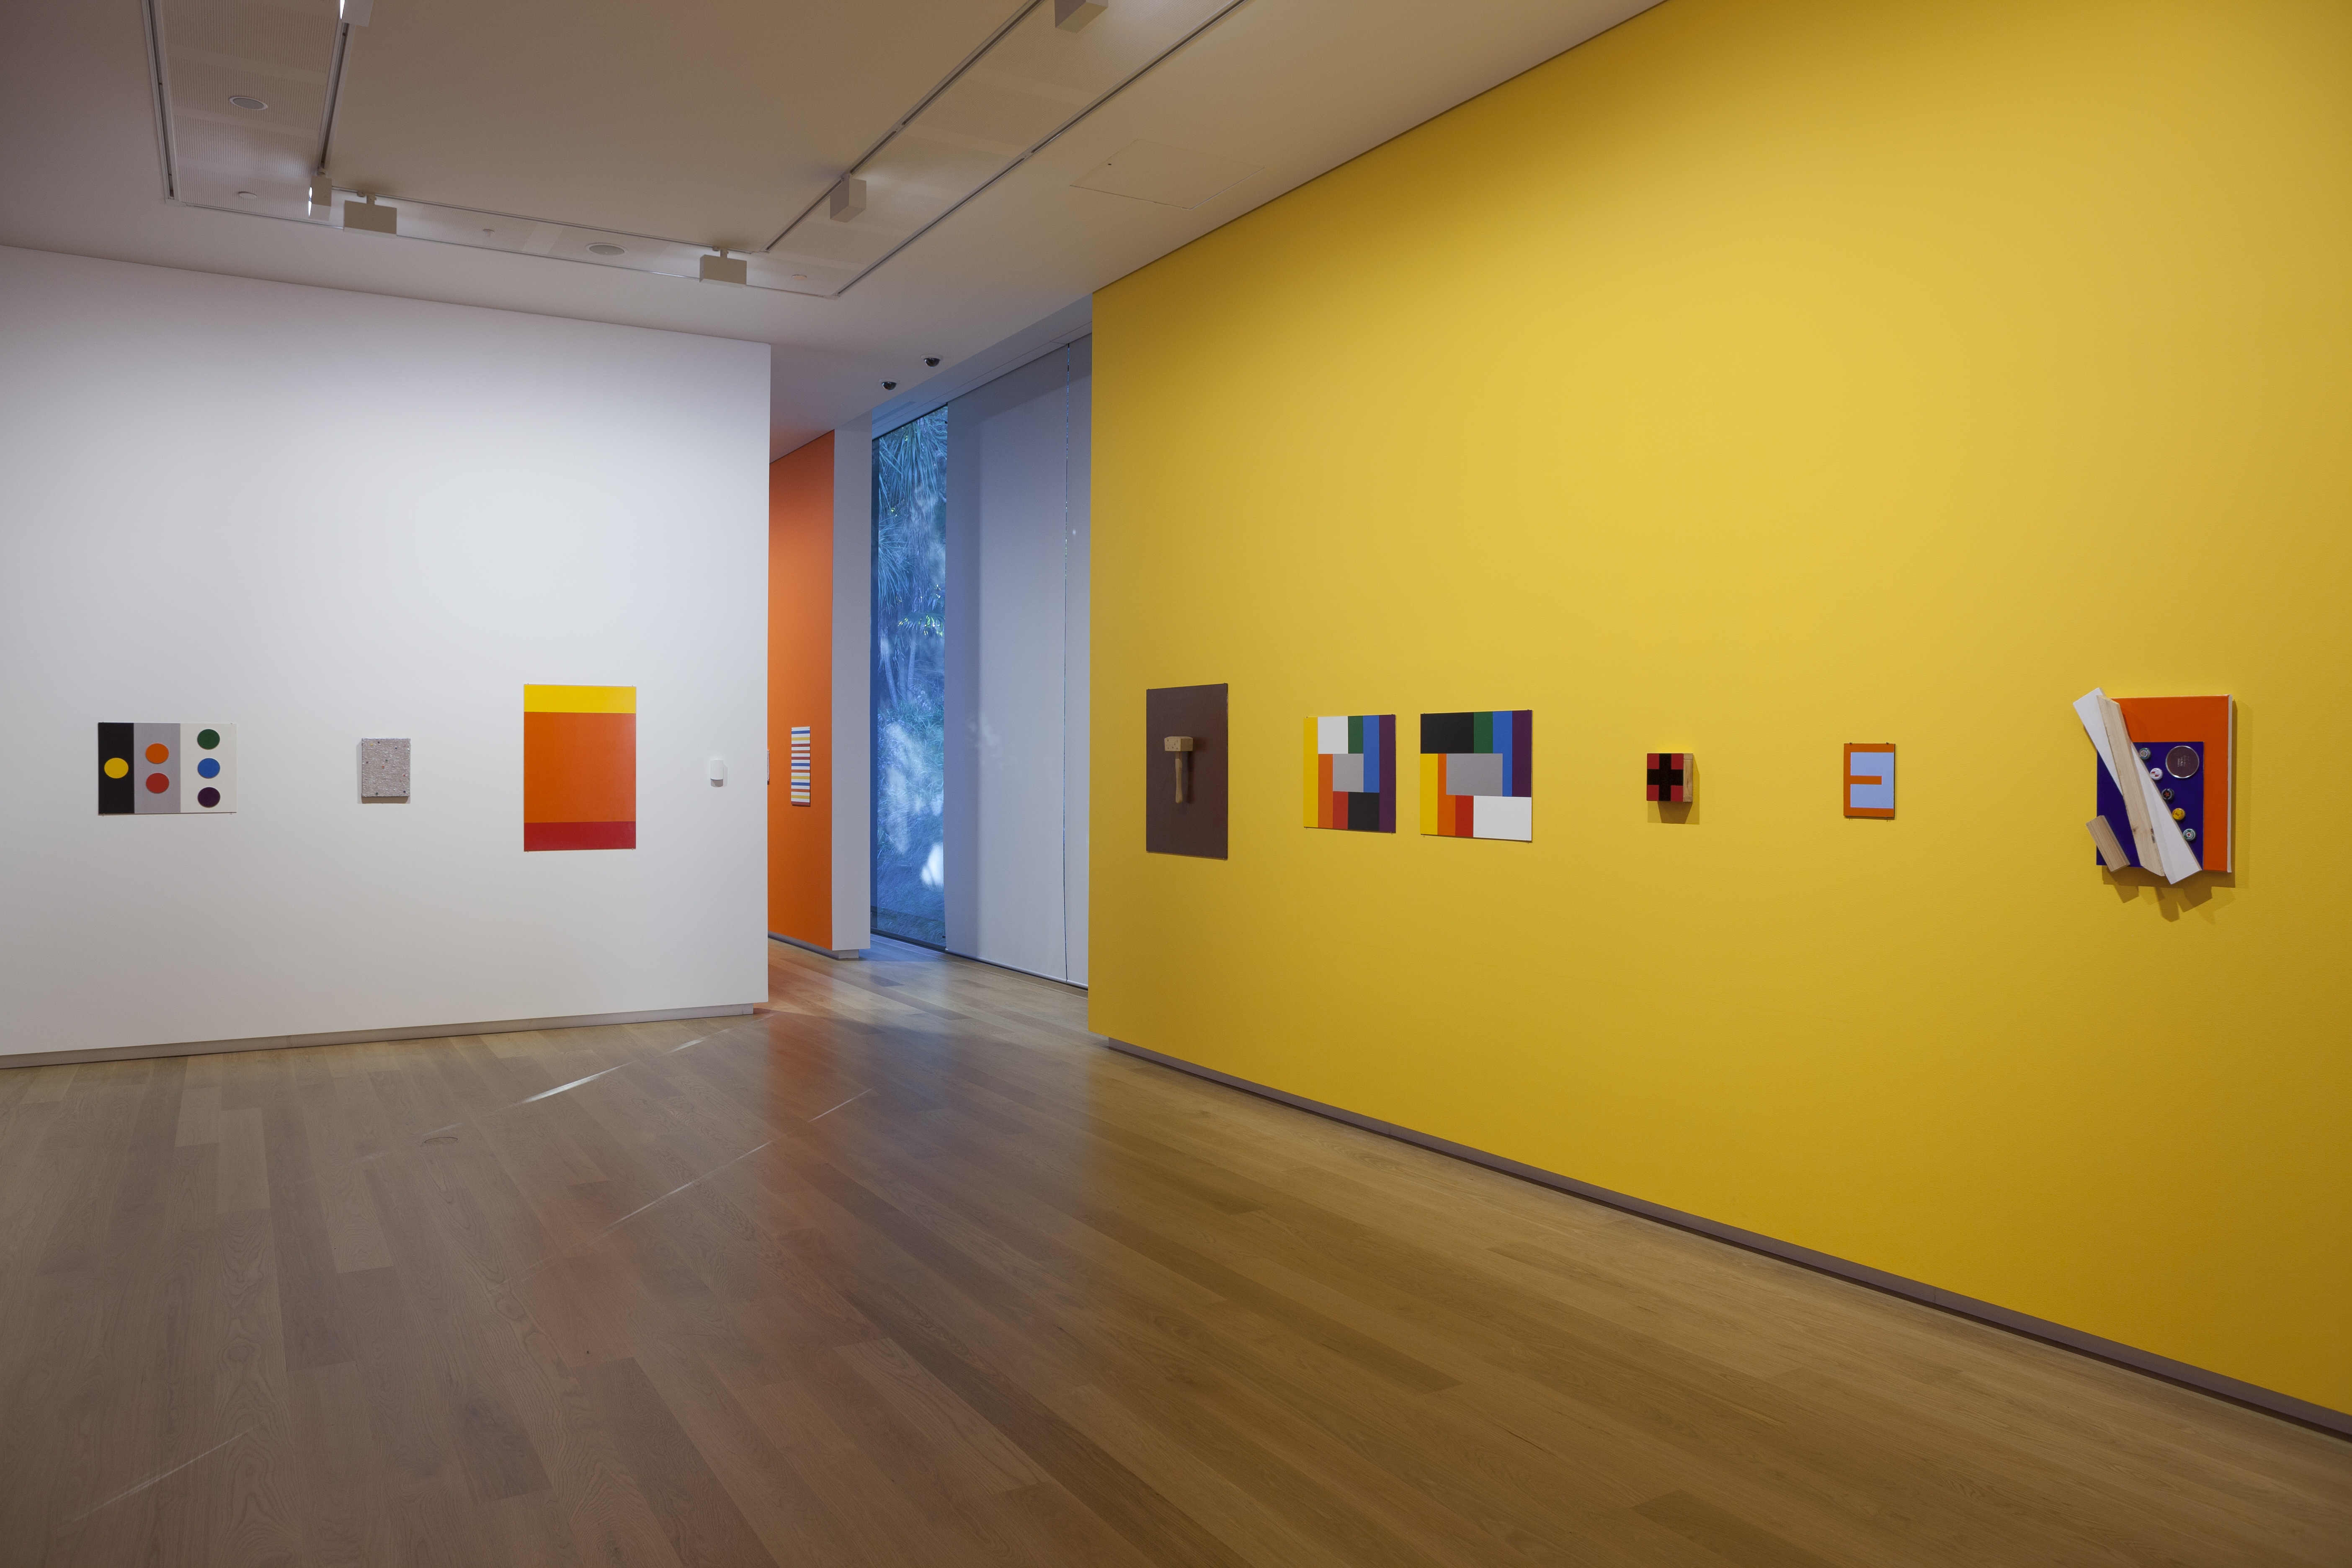 <p><em>John Nixon: Abstraction/Colour is an Abstraction</em>,&nbsp;2017-2018<br />
Installation view<br />
Auckland Art Gallery Toi O Tamaki<br />
Curated by Natasha Conland and Zara Stanhope</p>